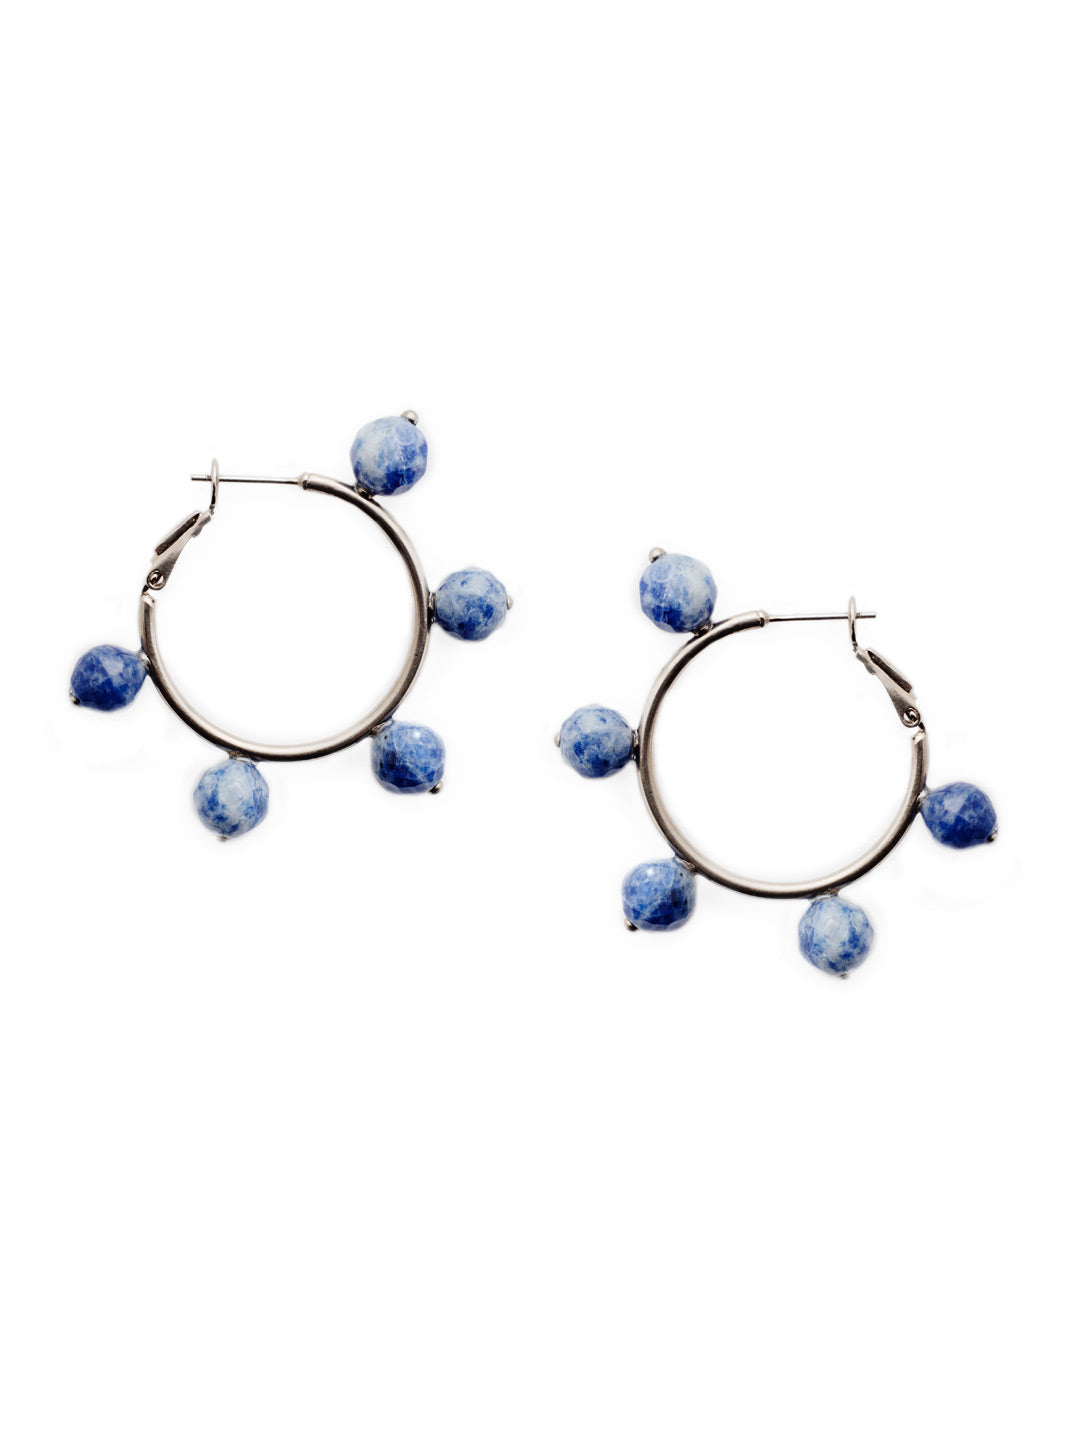 Gretchen Hoop Earrings - EEU82ASNFT - <p>Get our Gretchen Hoop Earrings now. Make a statement with a new twist on a classic style featuring fun beadwork. From Sorrelli's Night Frost collection in our Antique Silver-tone finish.</p>